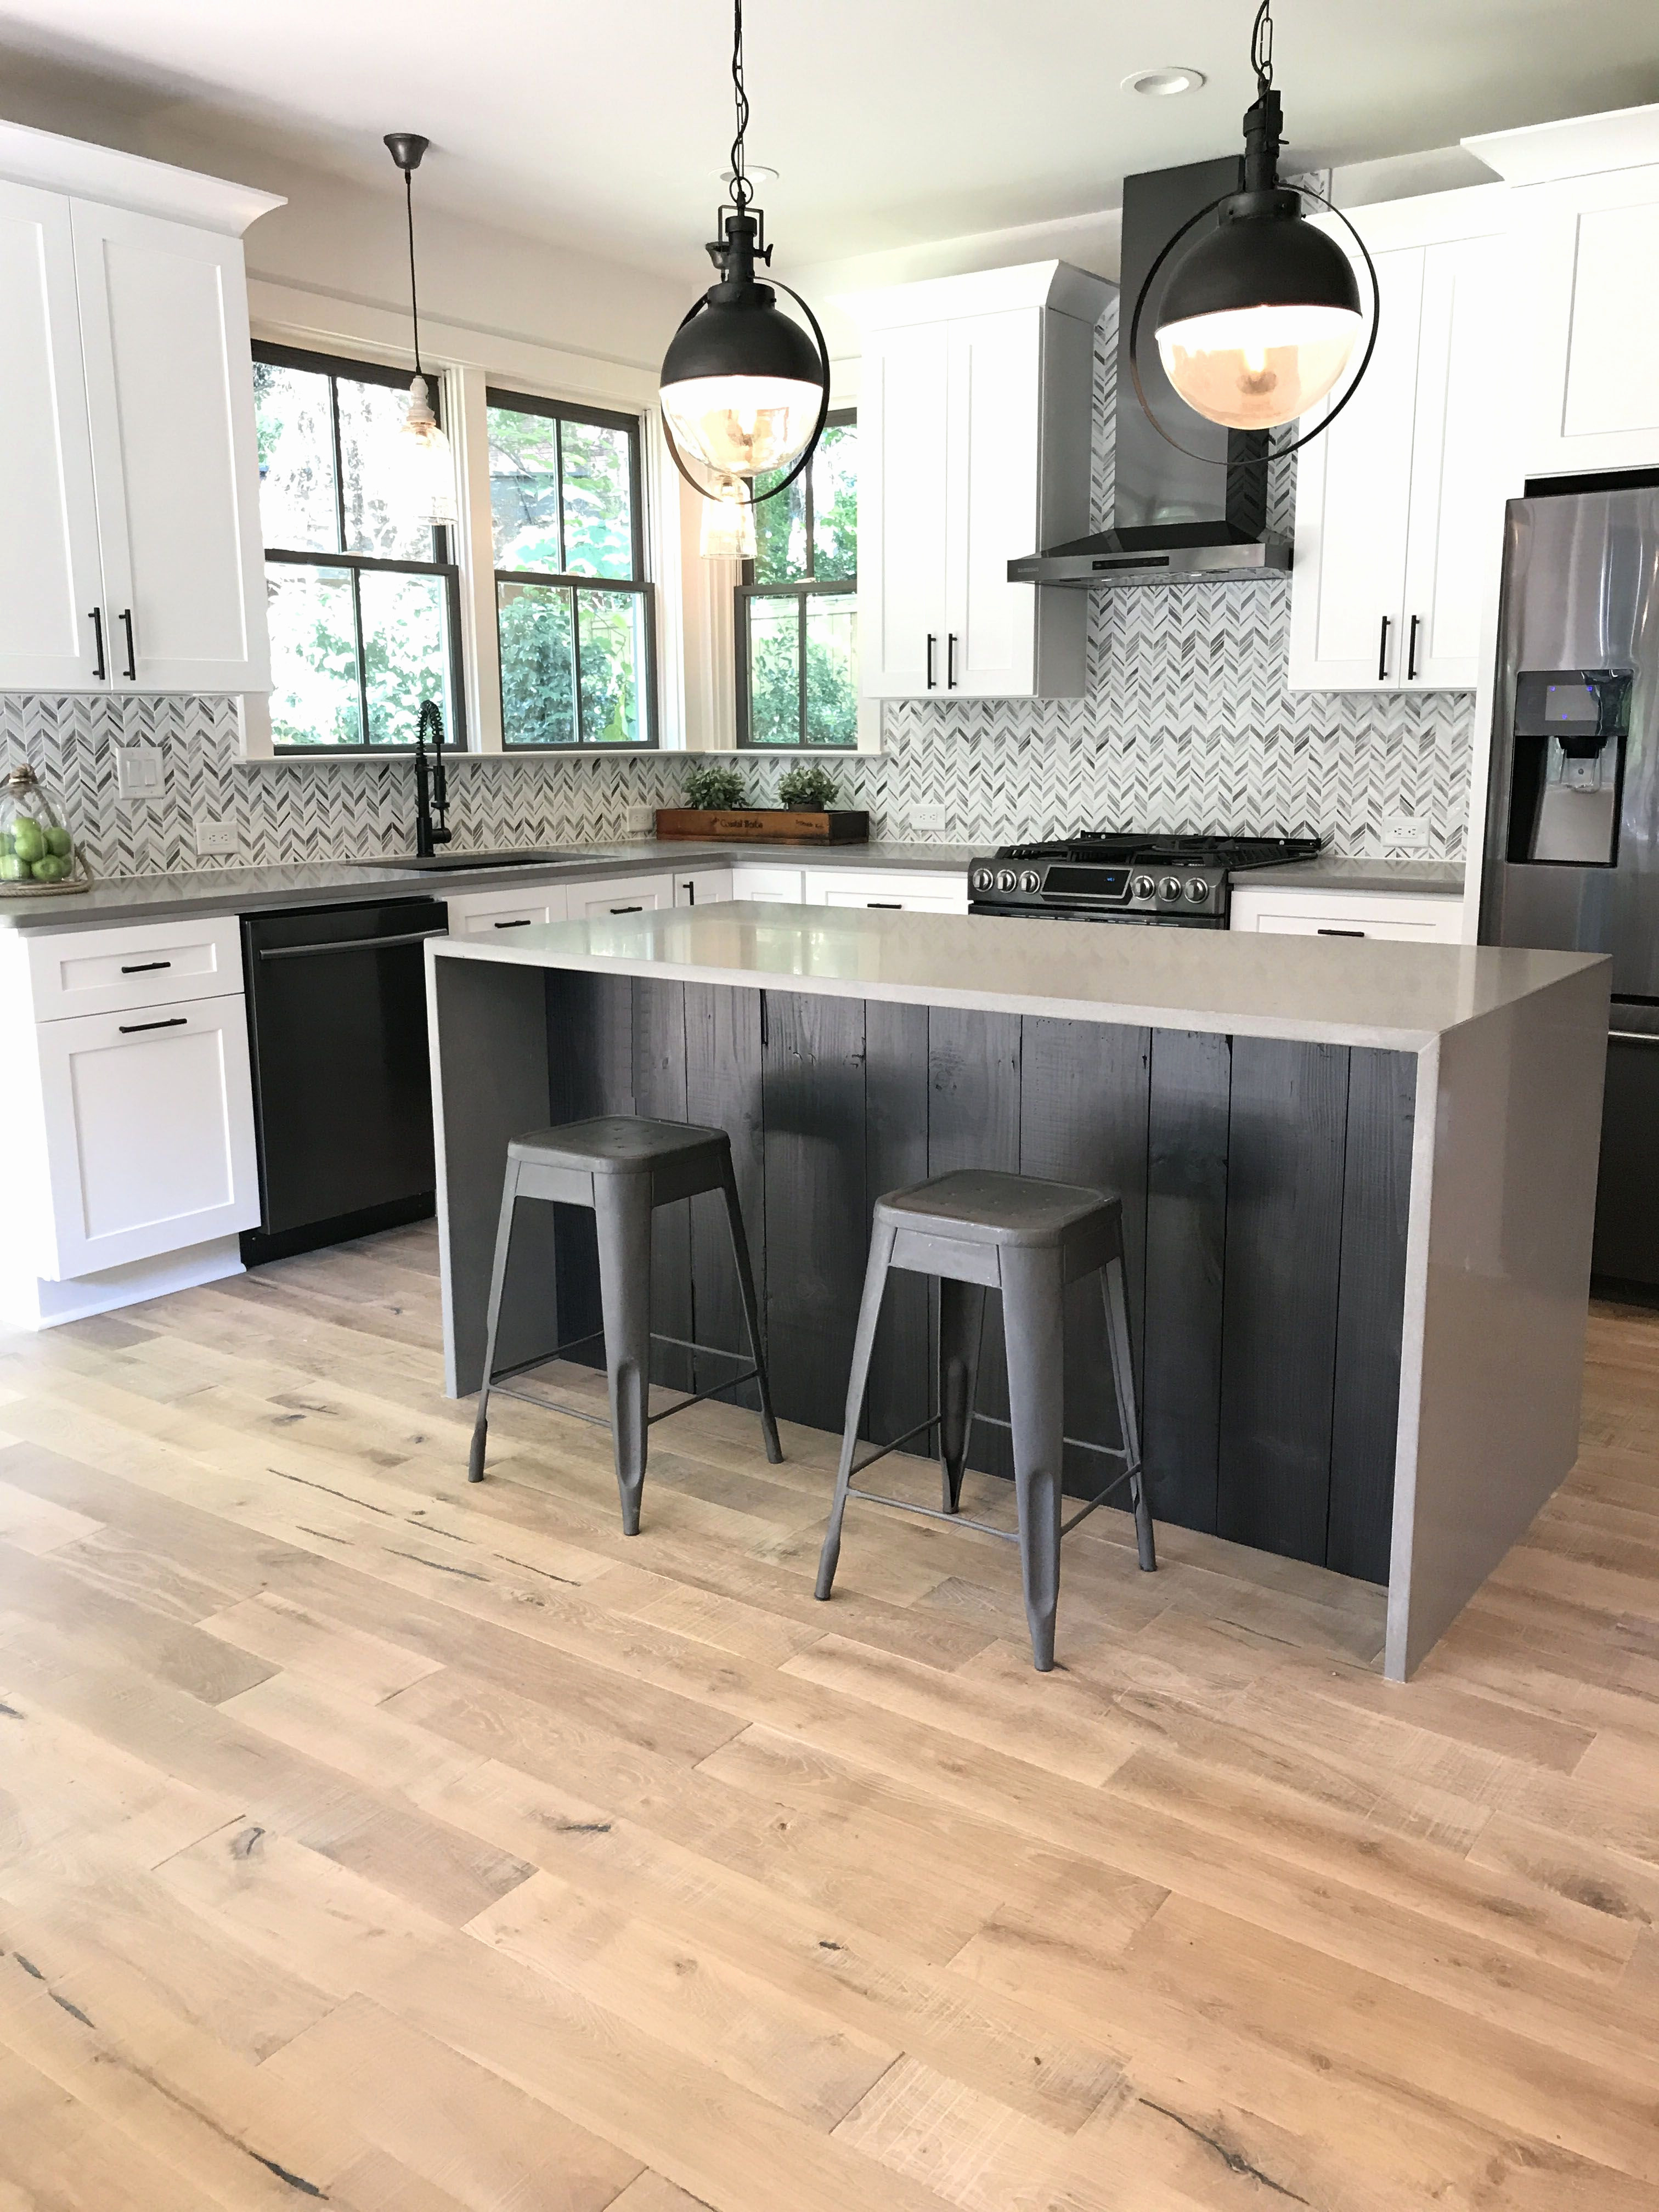 white kitchen with hardwood floors of pictures of laminate flooring in kitchen beautiful laminate flooring for pictures of laminate flooring in kitchen awesome remodel home storehouse planks drum white oak kitchen hardwood